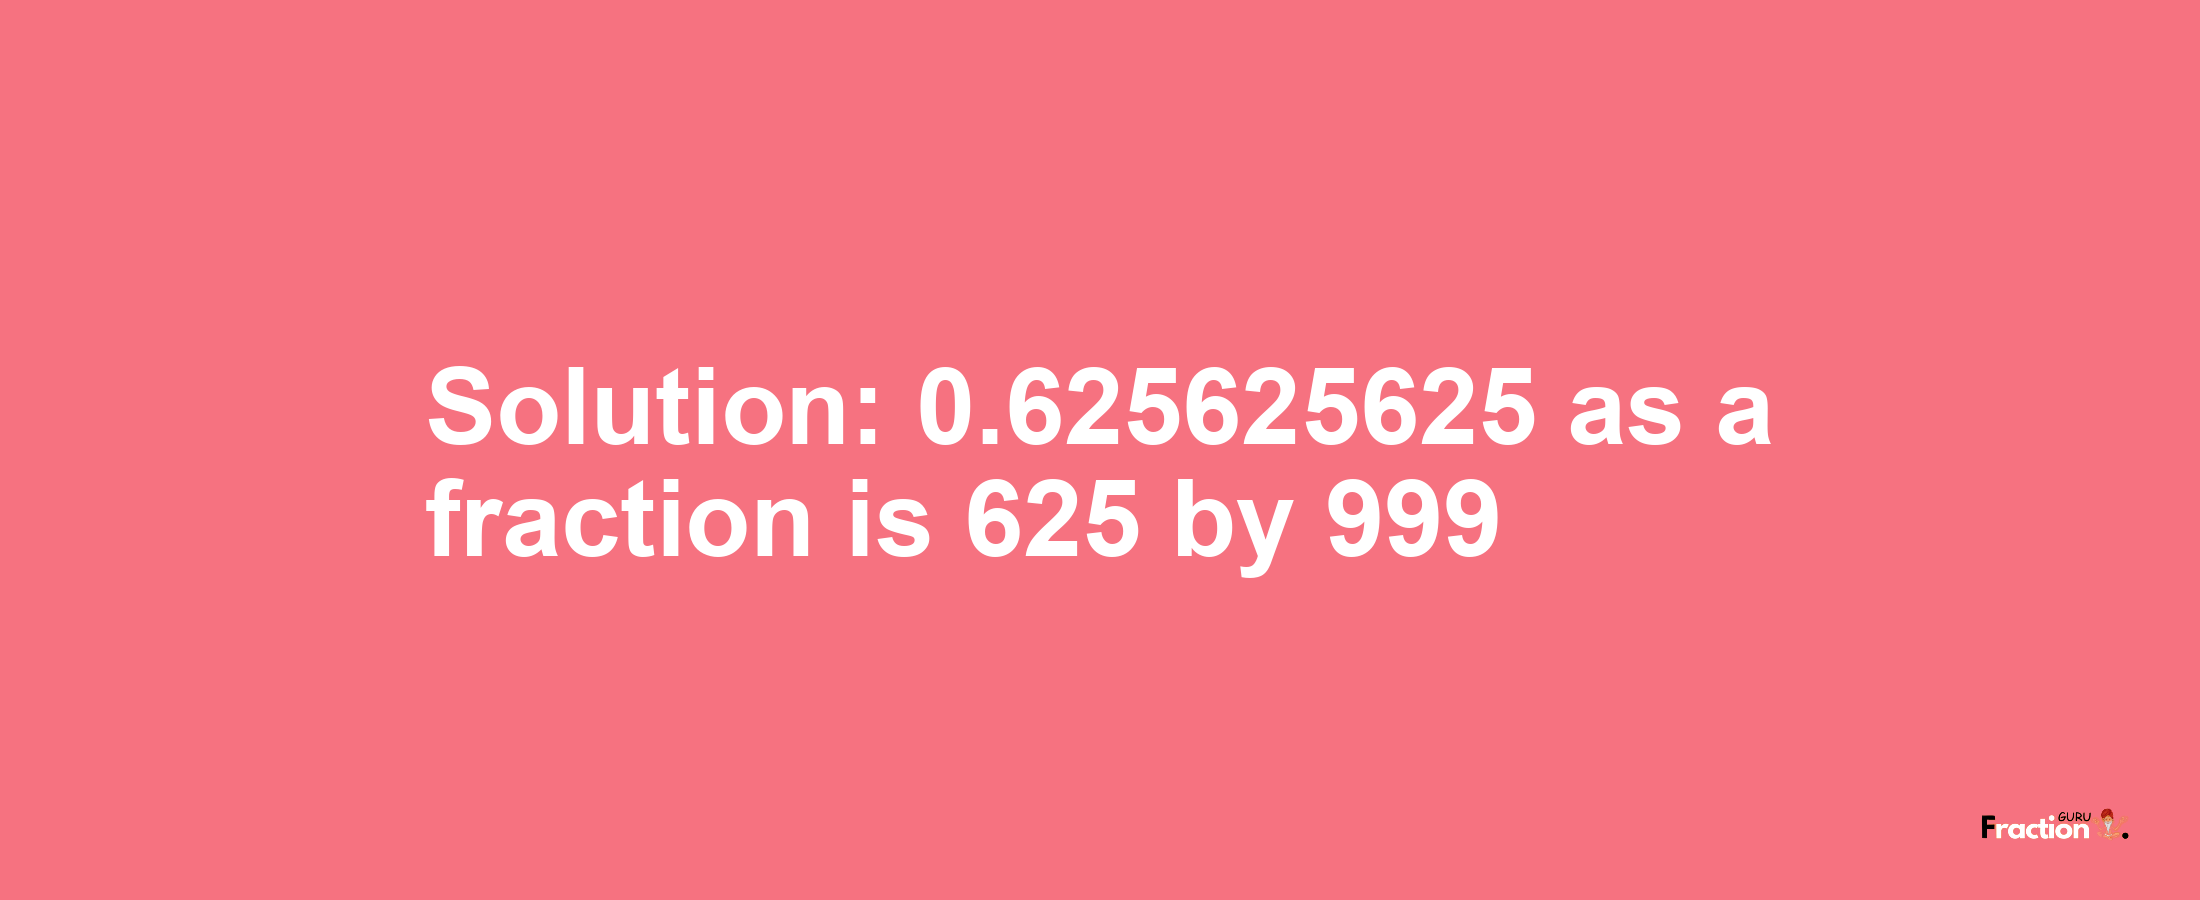 Solution:0.625625625 as a fraction is 625/999